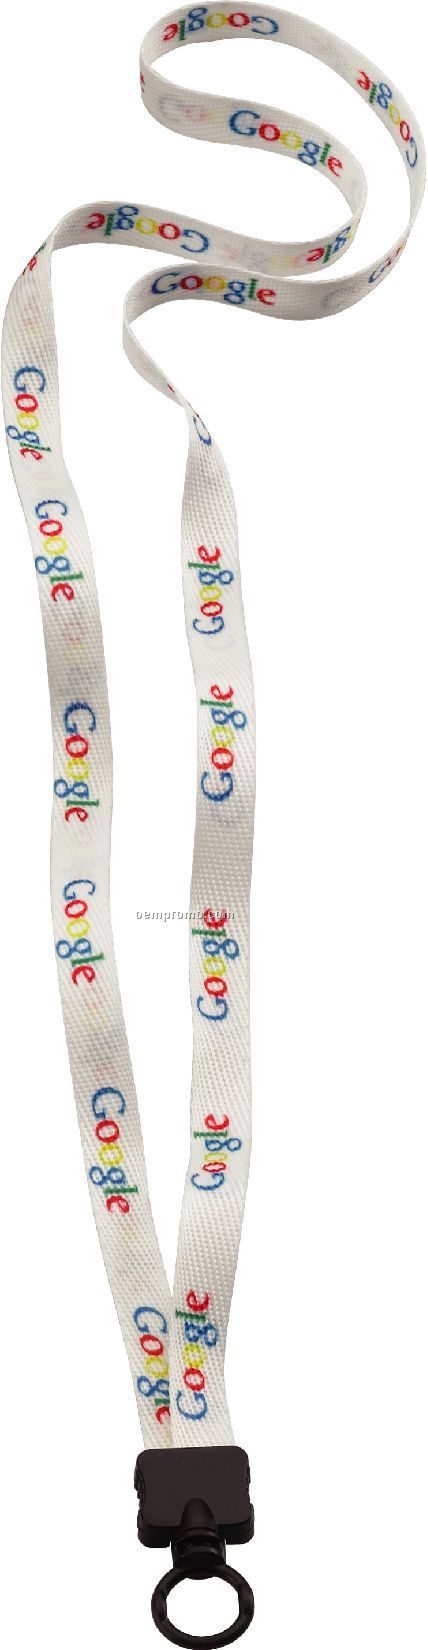 1/2" Rpet Waffle Weave Dye Sublimated Lanyard W/ Plastic Clamshell & O-ring